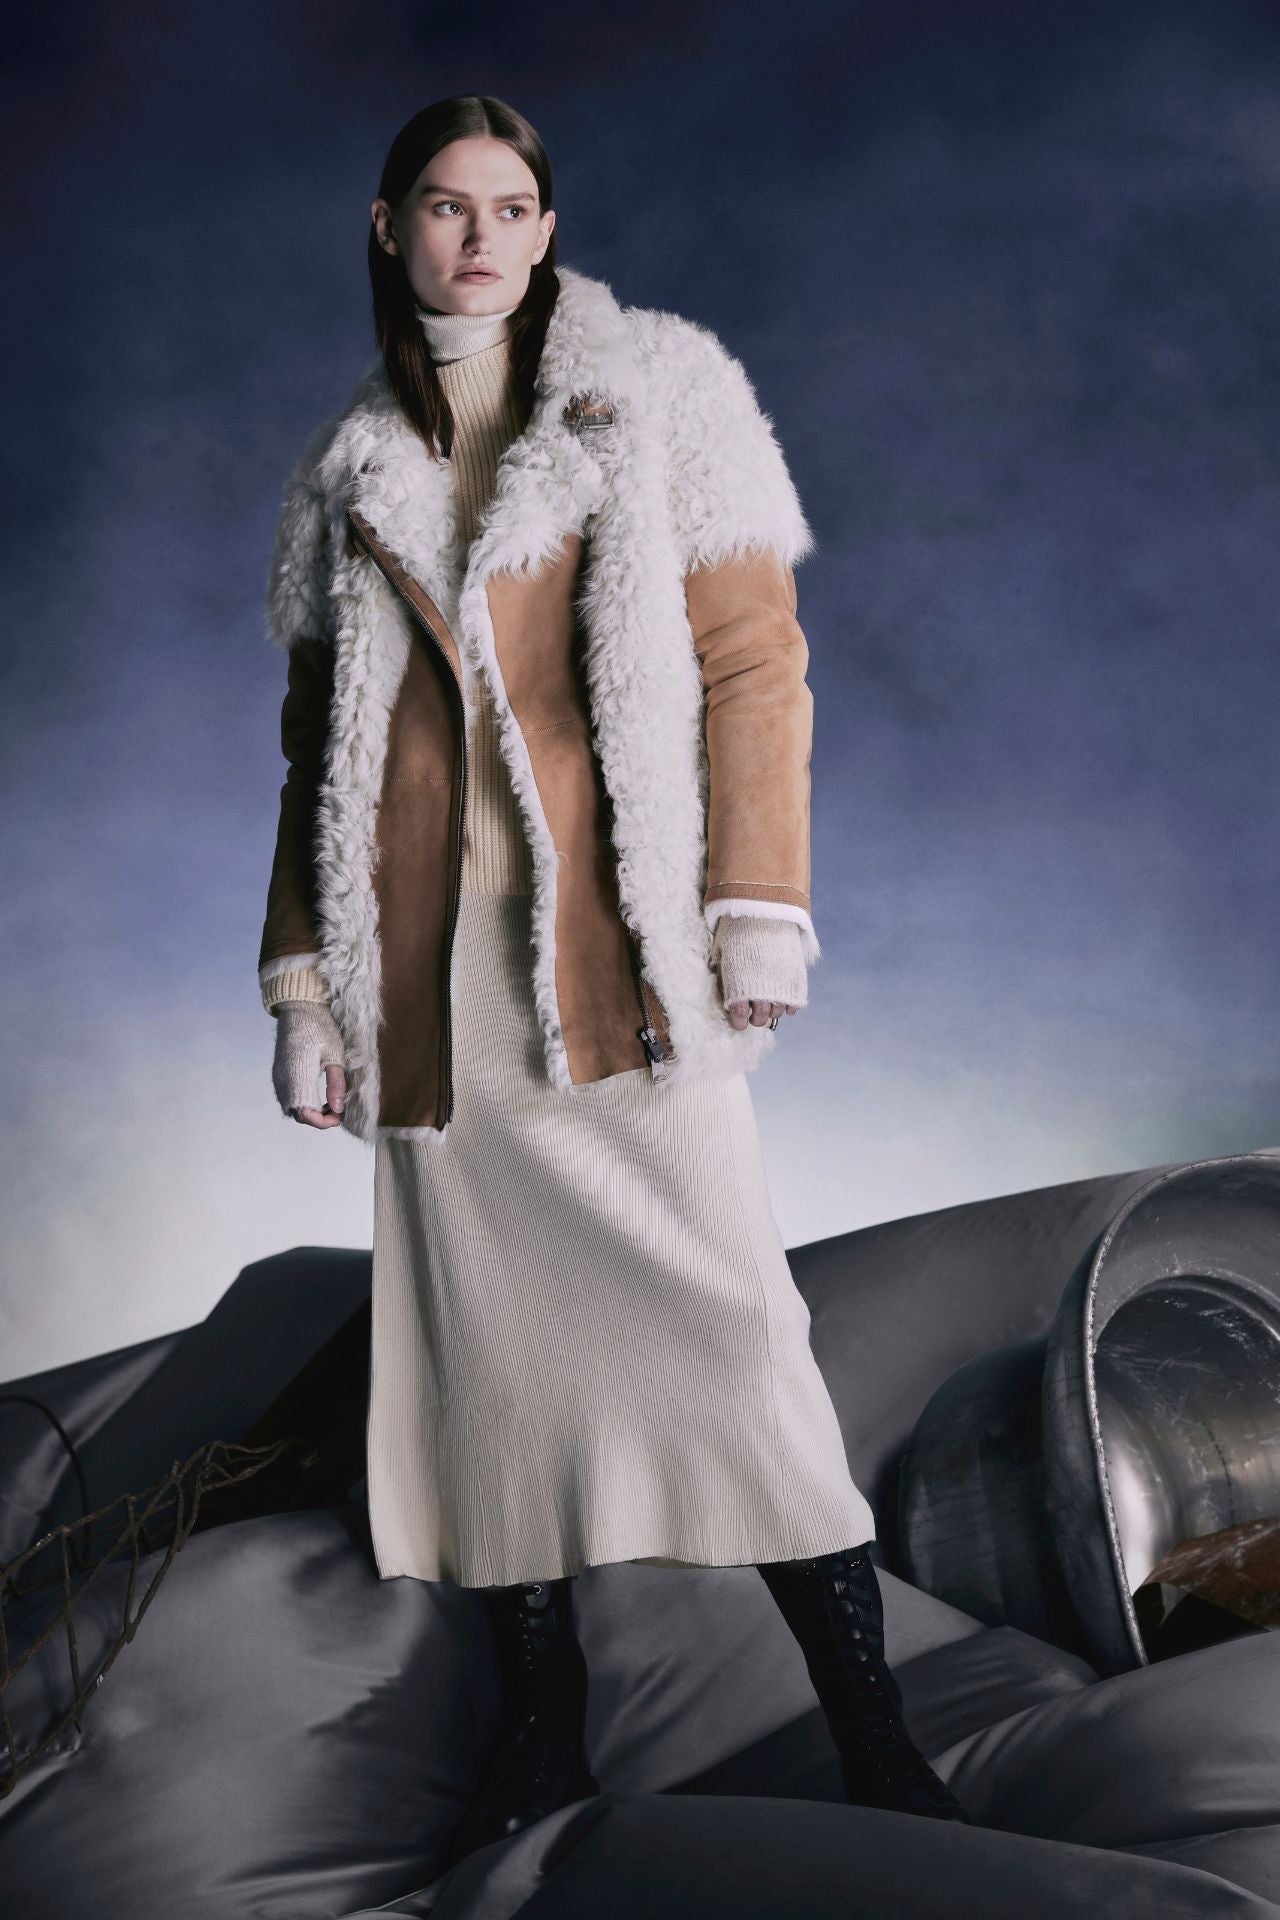 This stylish jacket is designed with an asymmetrical zip closure and waterfall collar. Crafted in genuine shearling, the jacket is finished with side zip pockets and double buckle detail at the collar. Genuine Shearling Waterfall collar Long-sleeve Zipper closure